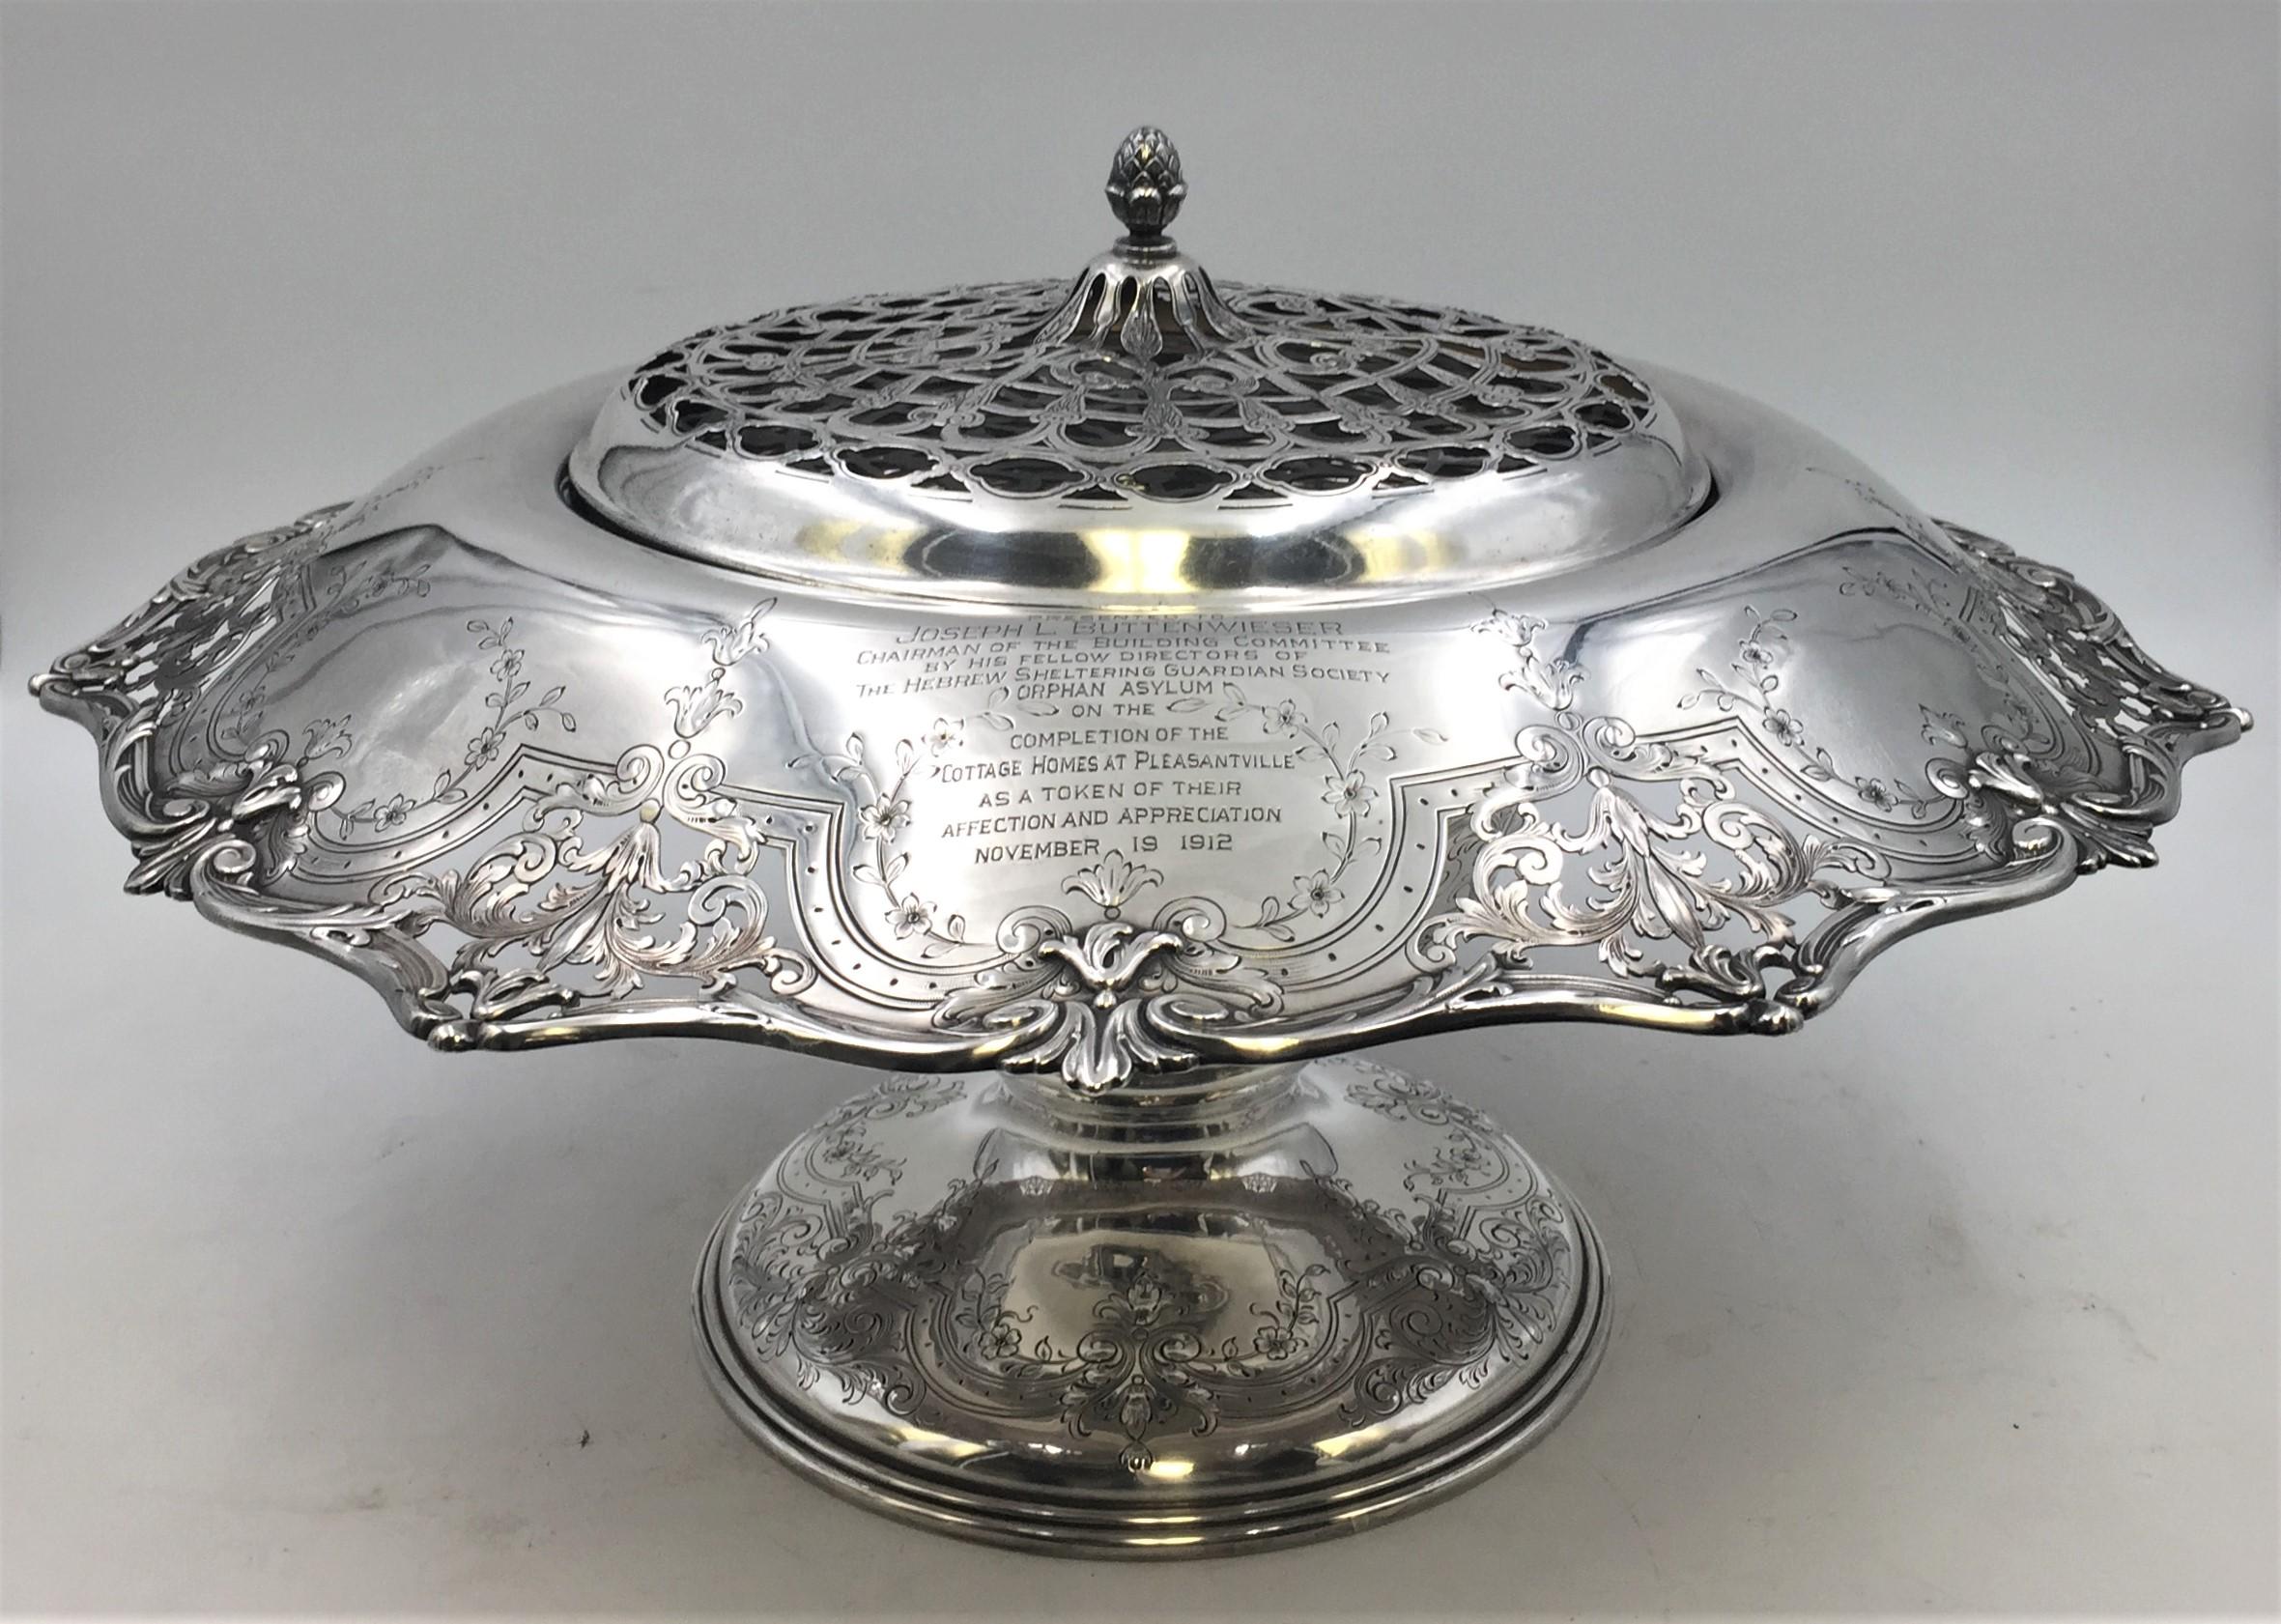 Early 20th century Graff, Washbourne & Dunn sterling silver rose bowl centerpiece with grill for flowers and a body with floral pierced rim and engravings, including a dedicatory inscription dated 1912. Measuring 17'' in diameter by 8'' in height